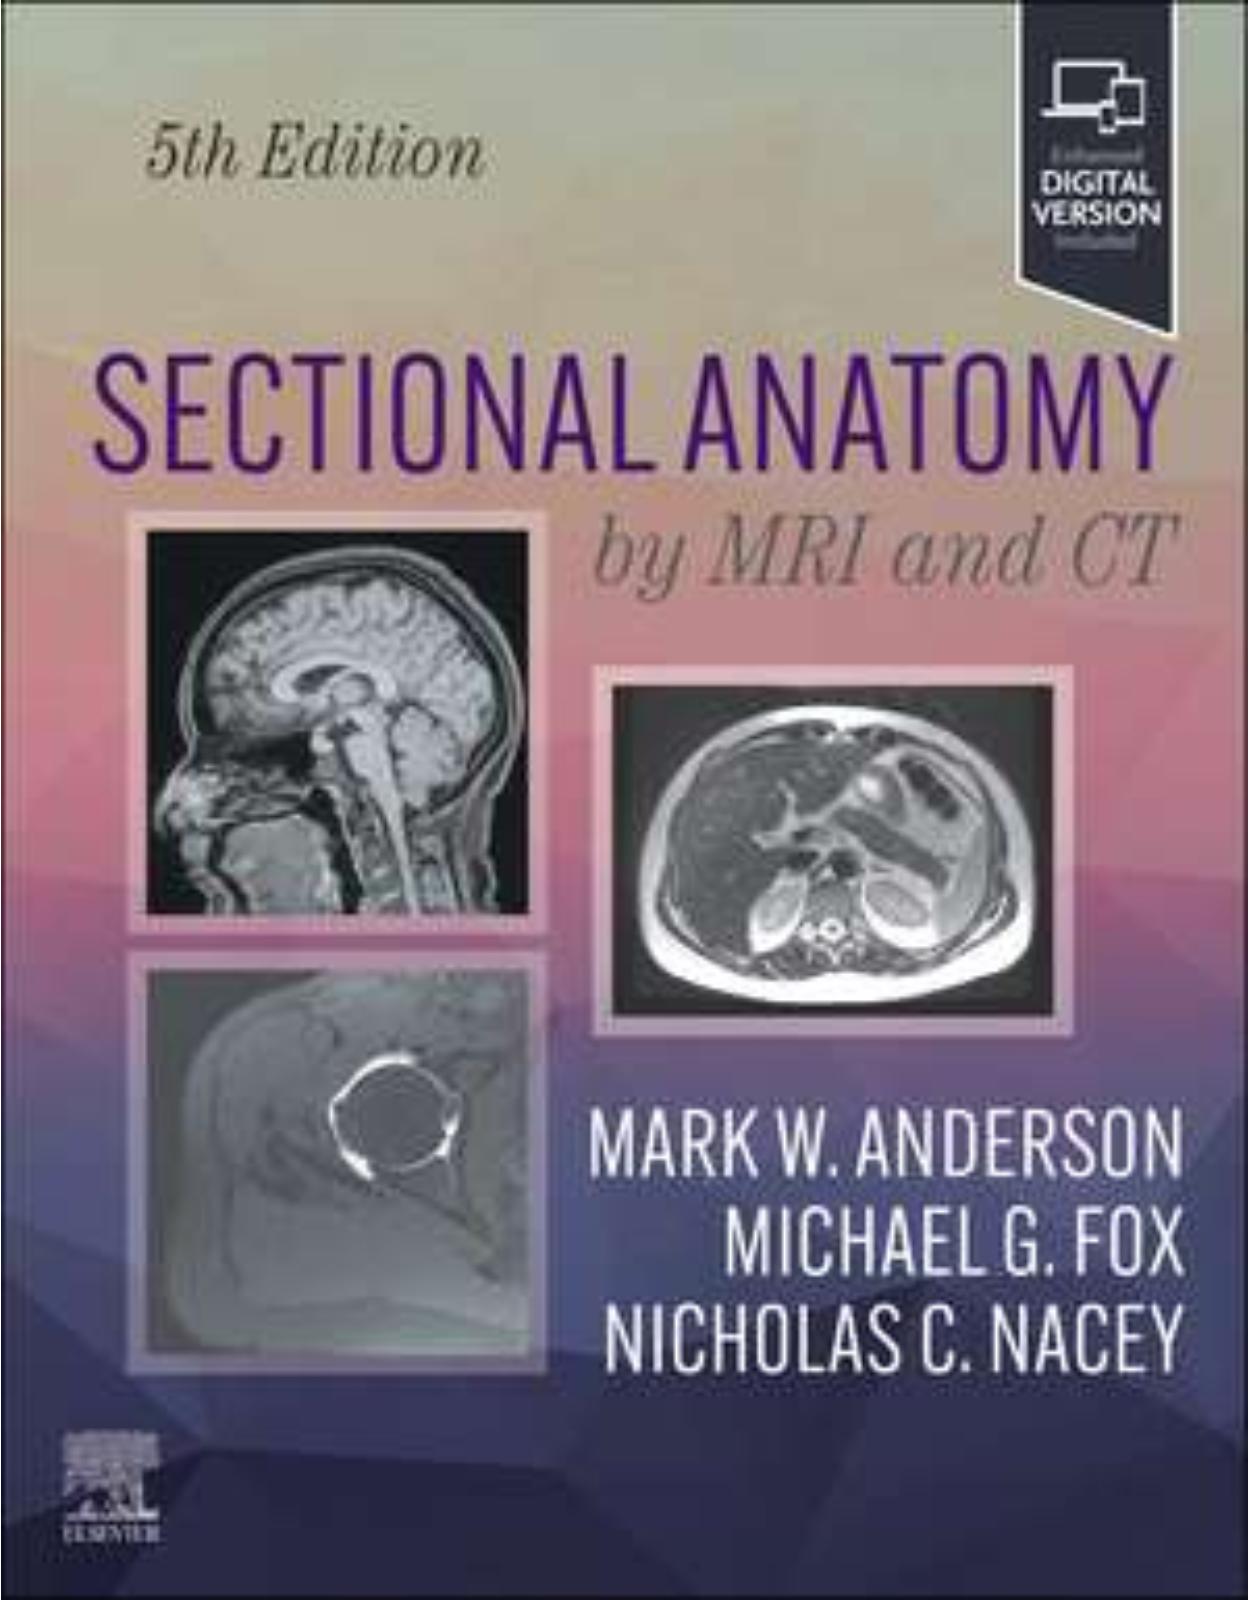 Sectional Anatomy by MRI and CT-5th edition